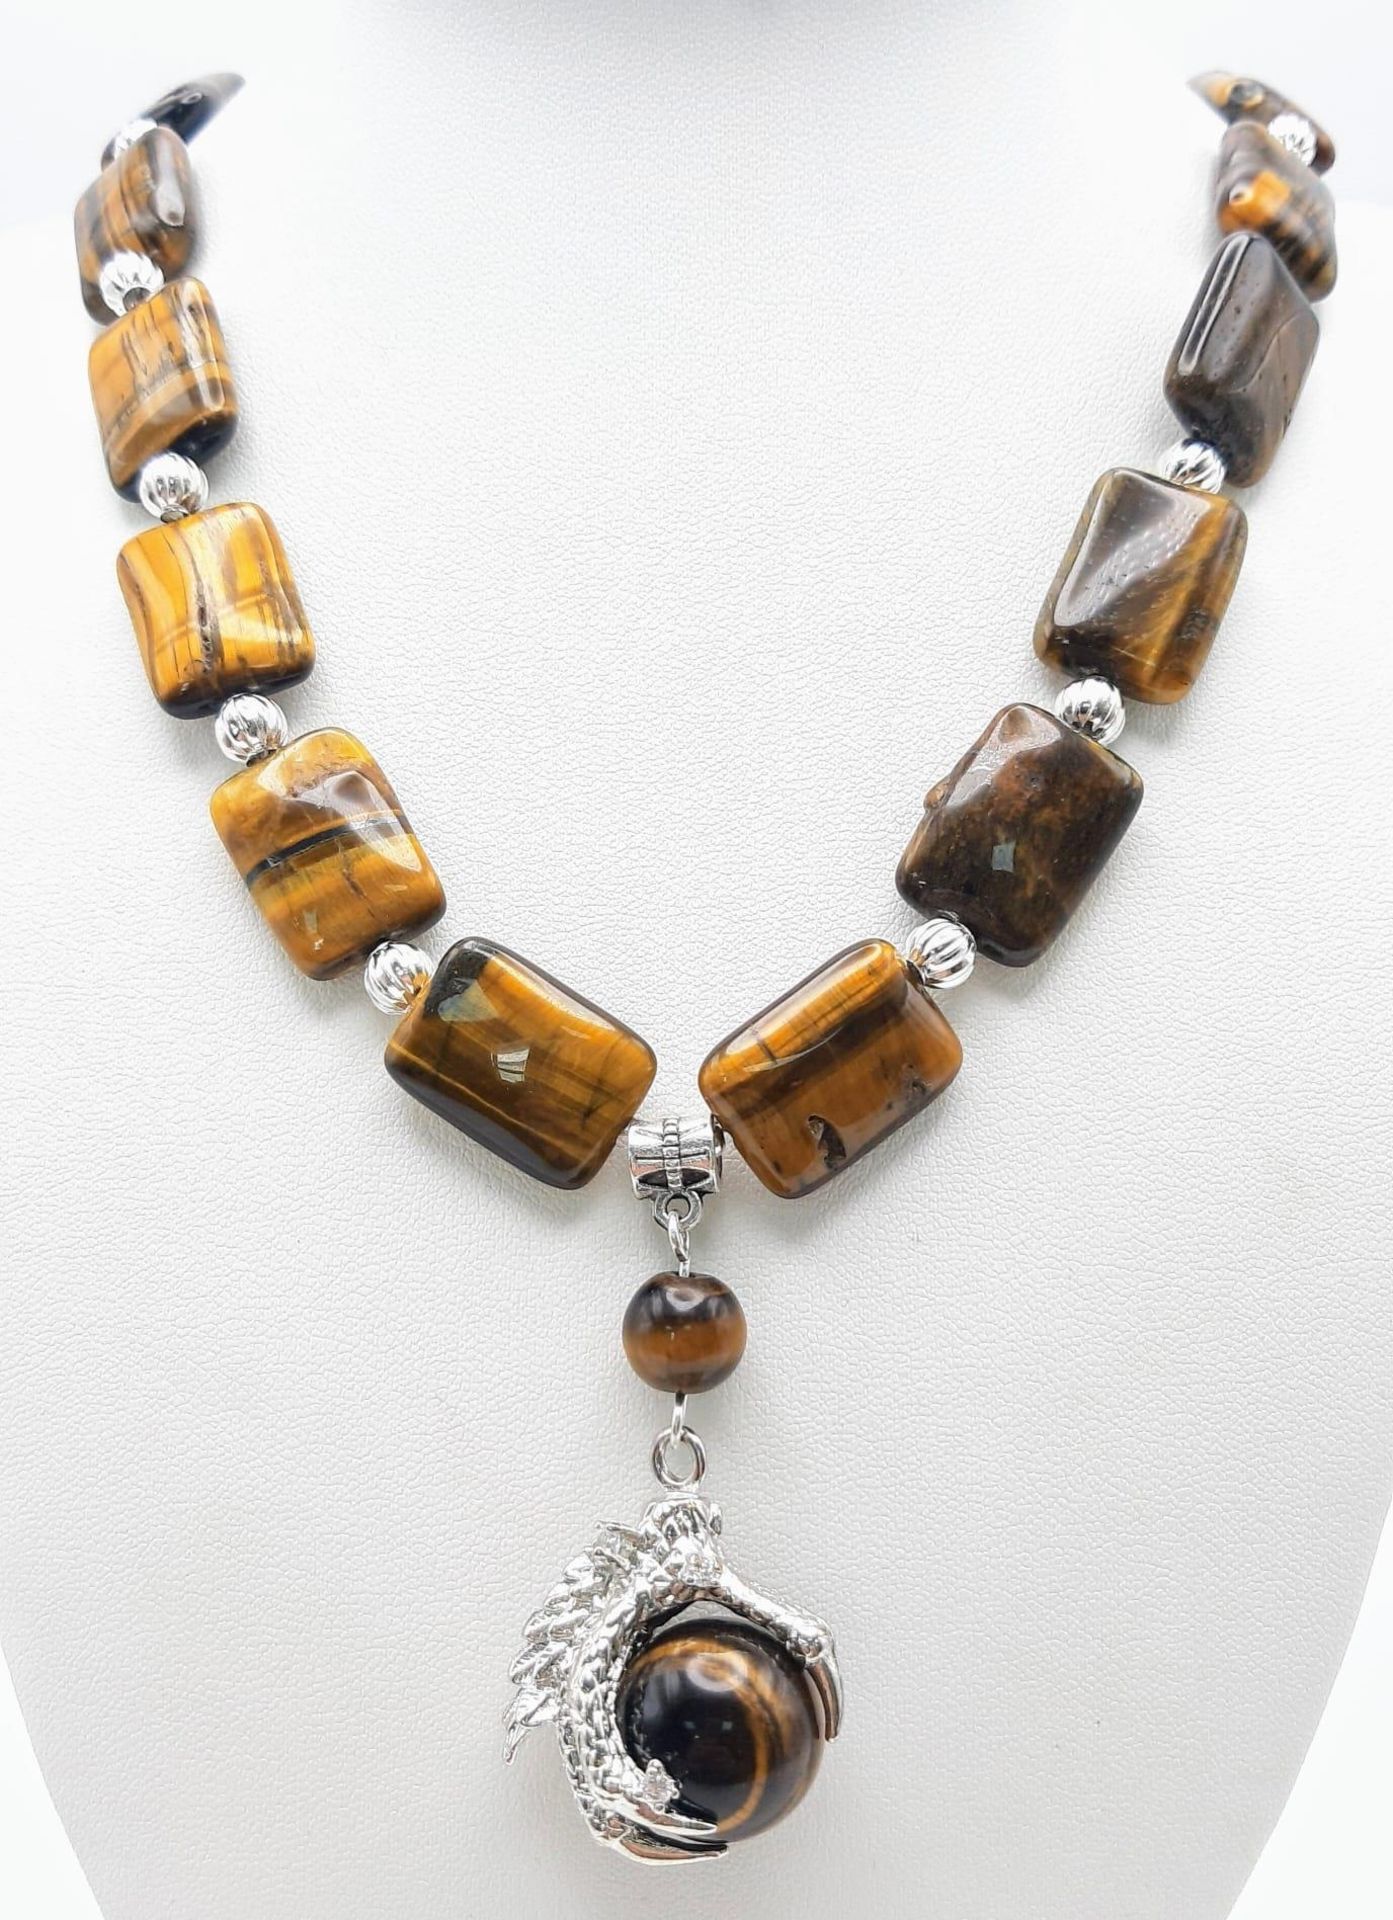 A substantial tiger’s eye necklace and earrings set with eagle claw pendants, beads 20 x 15 x 7 - Image 2 of 4